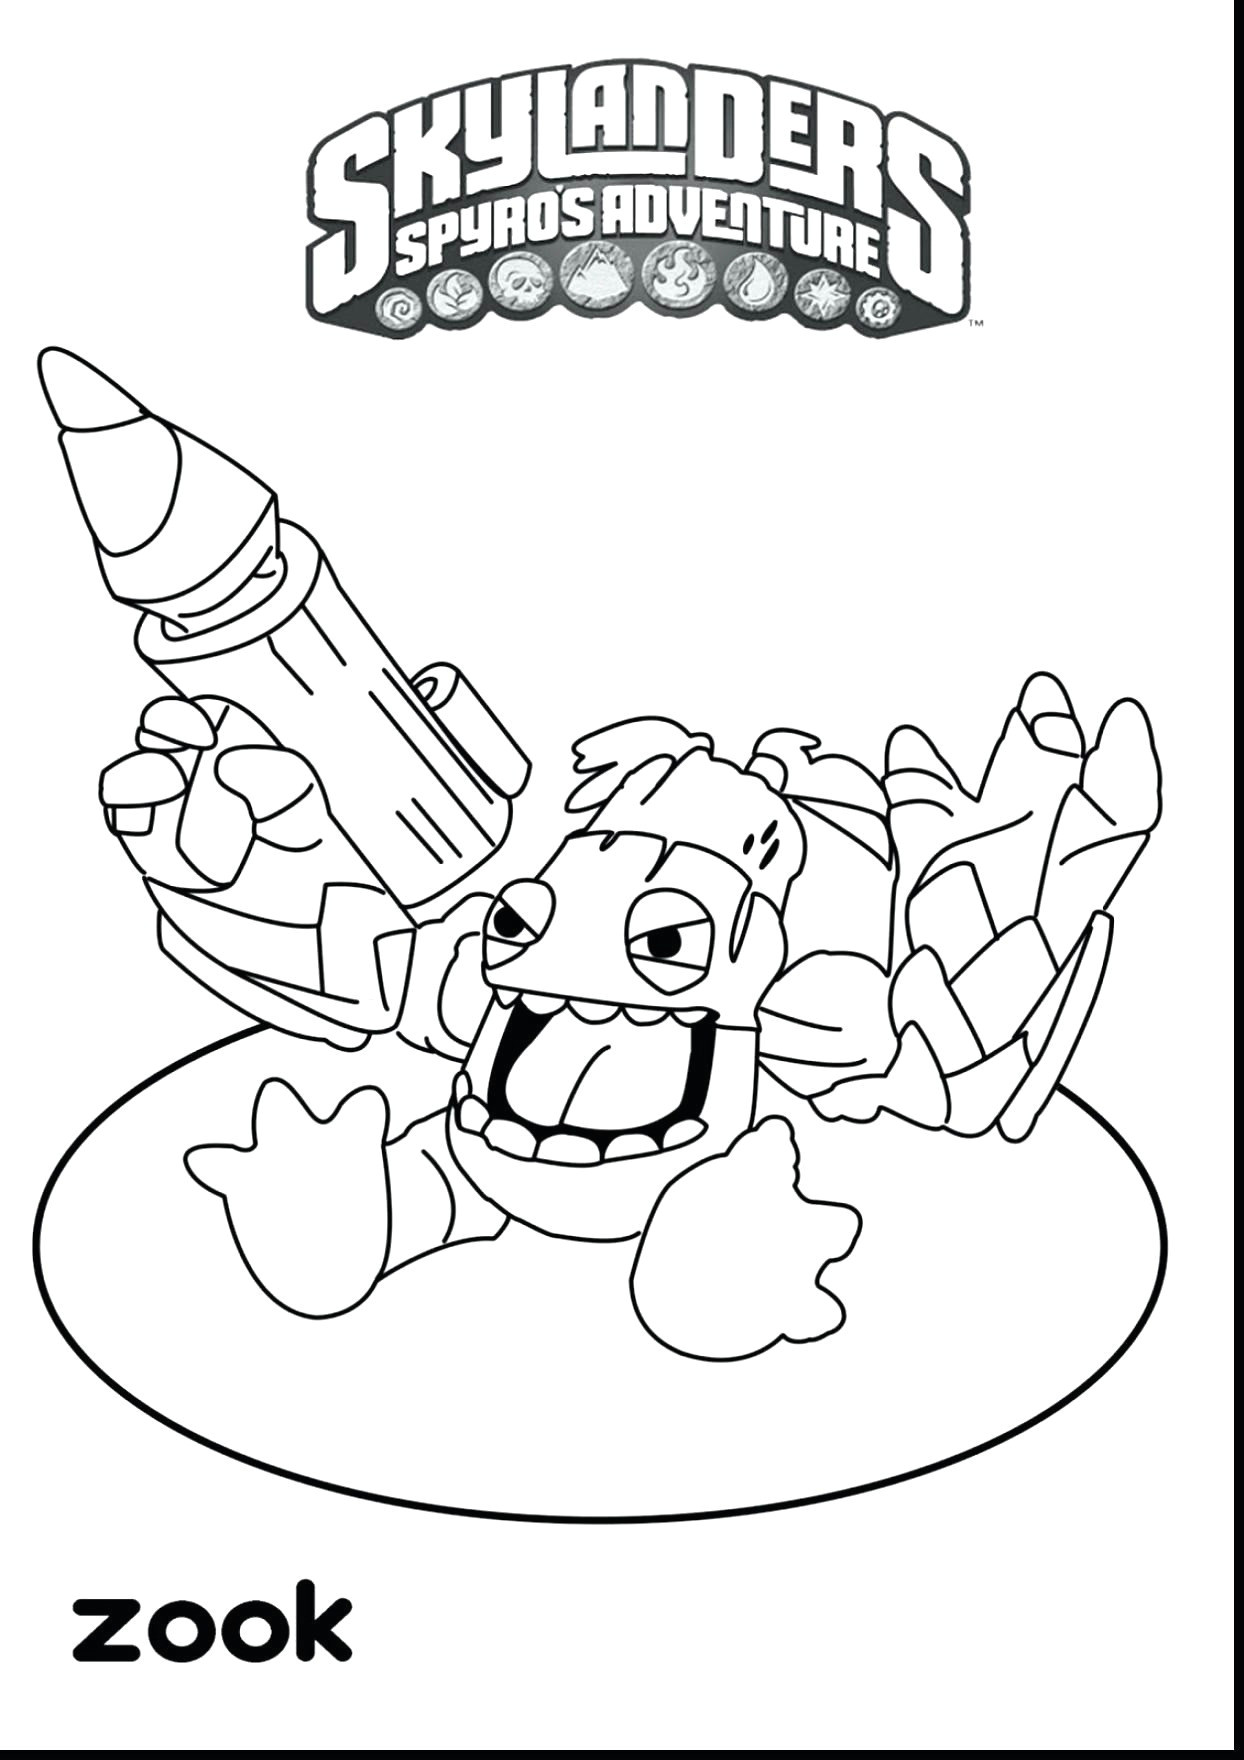 Drawing Cartoons Website Www Colouring Pages Brilliant Easy to Draw Instruments Home Coloring